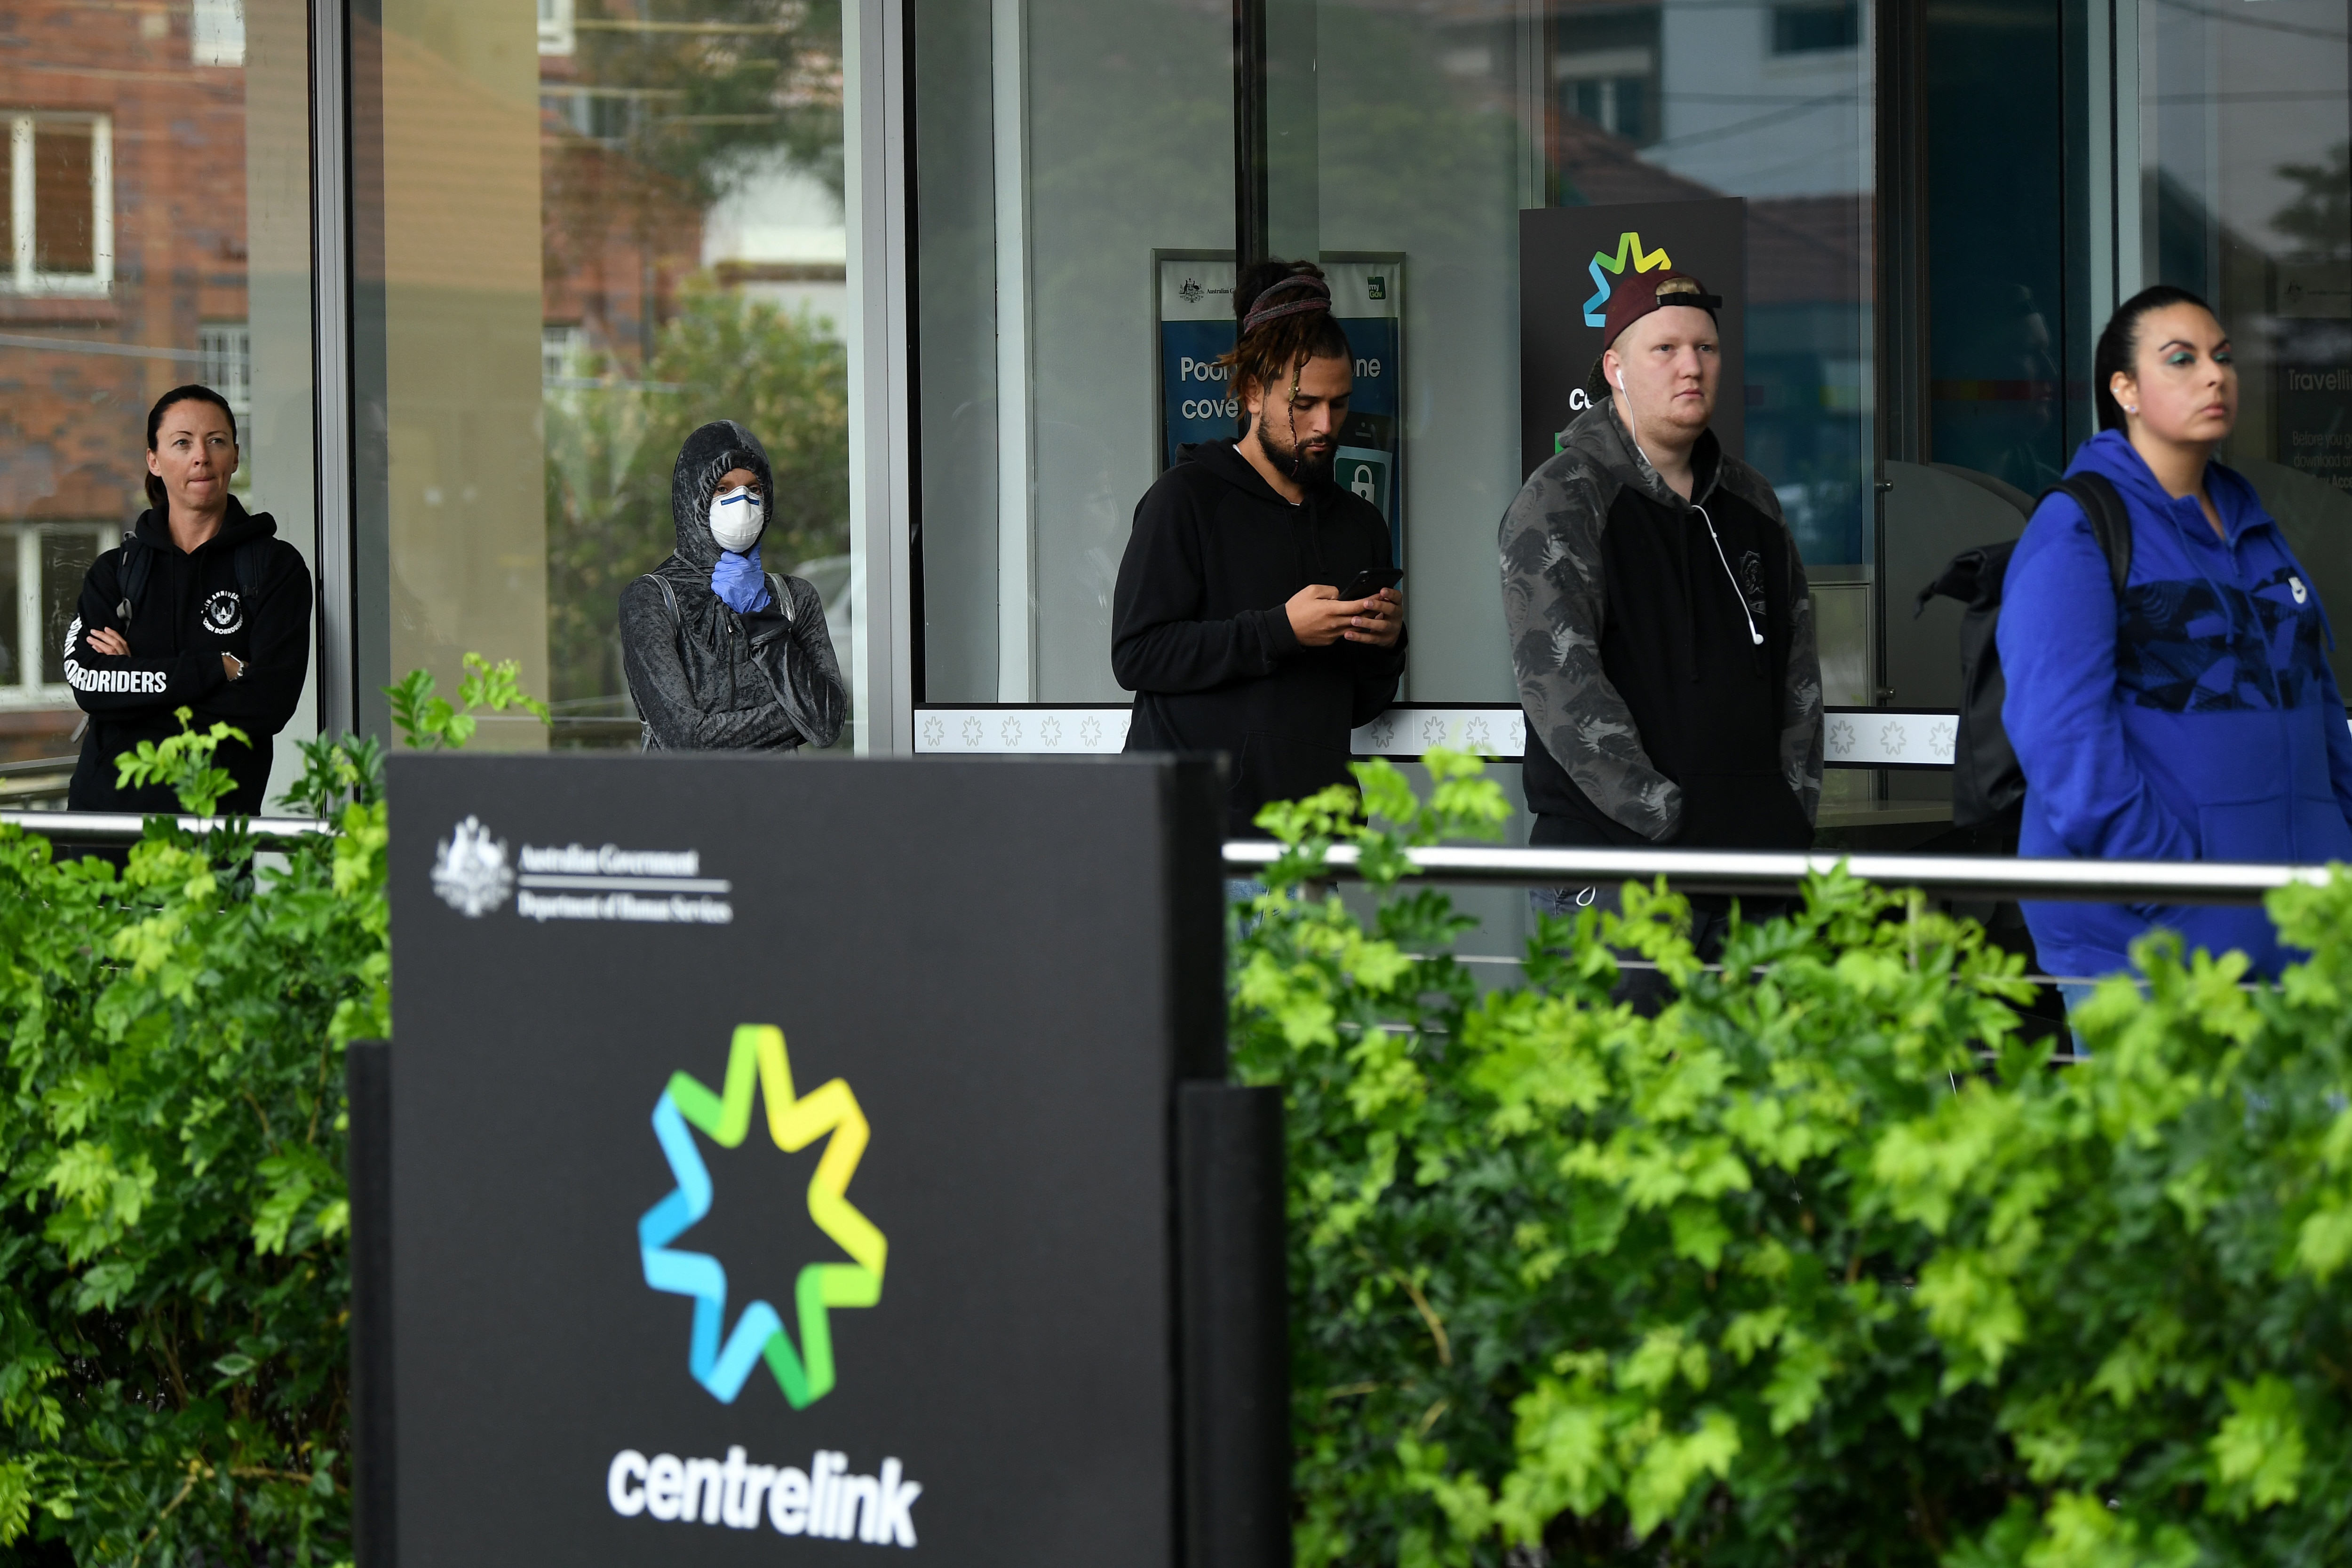 People are seen queuing outside a Centrelink office in Bondi Junction, Sydney.